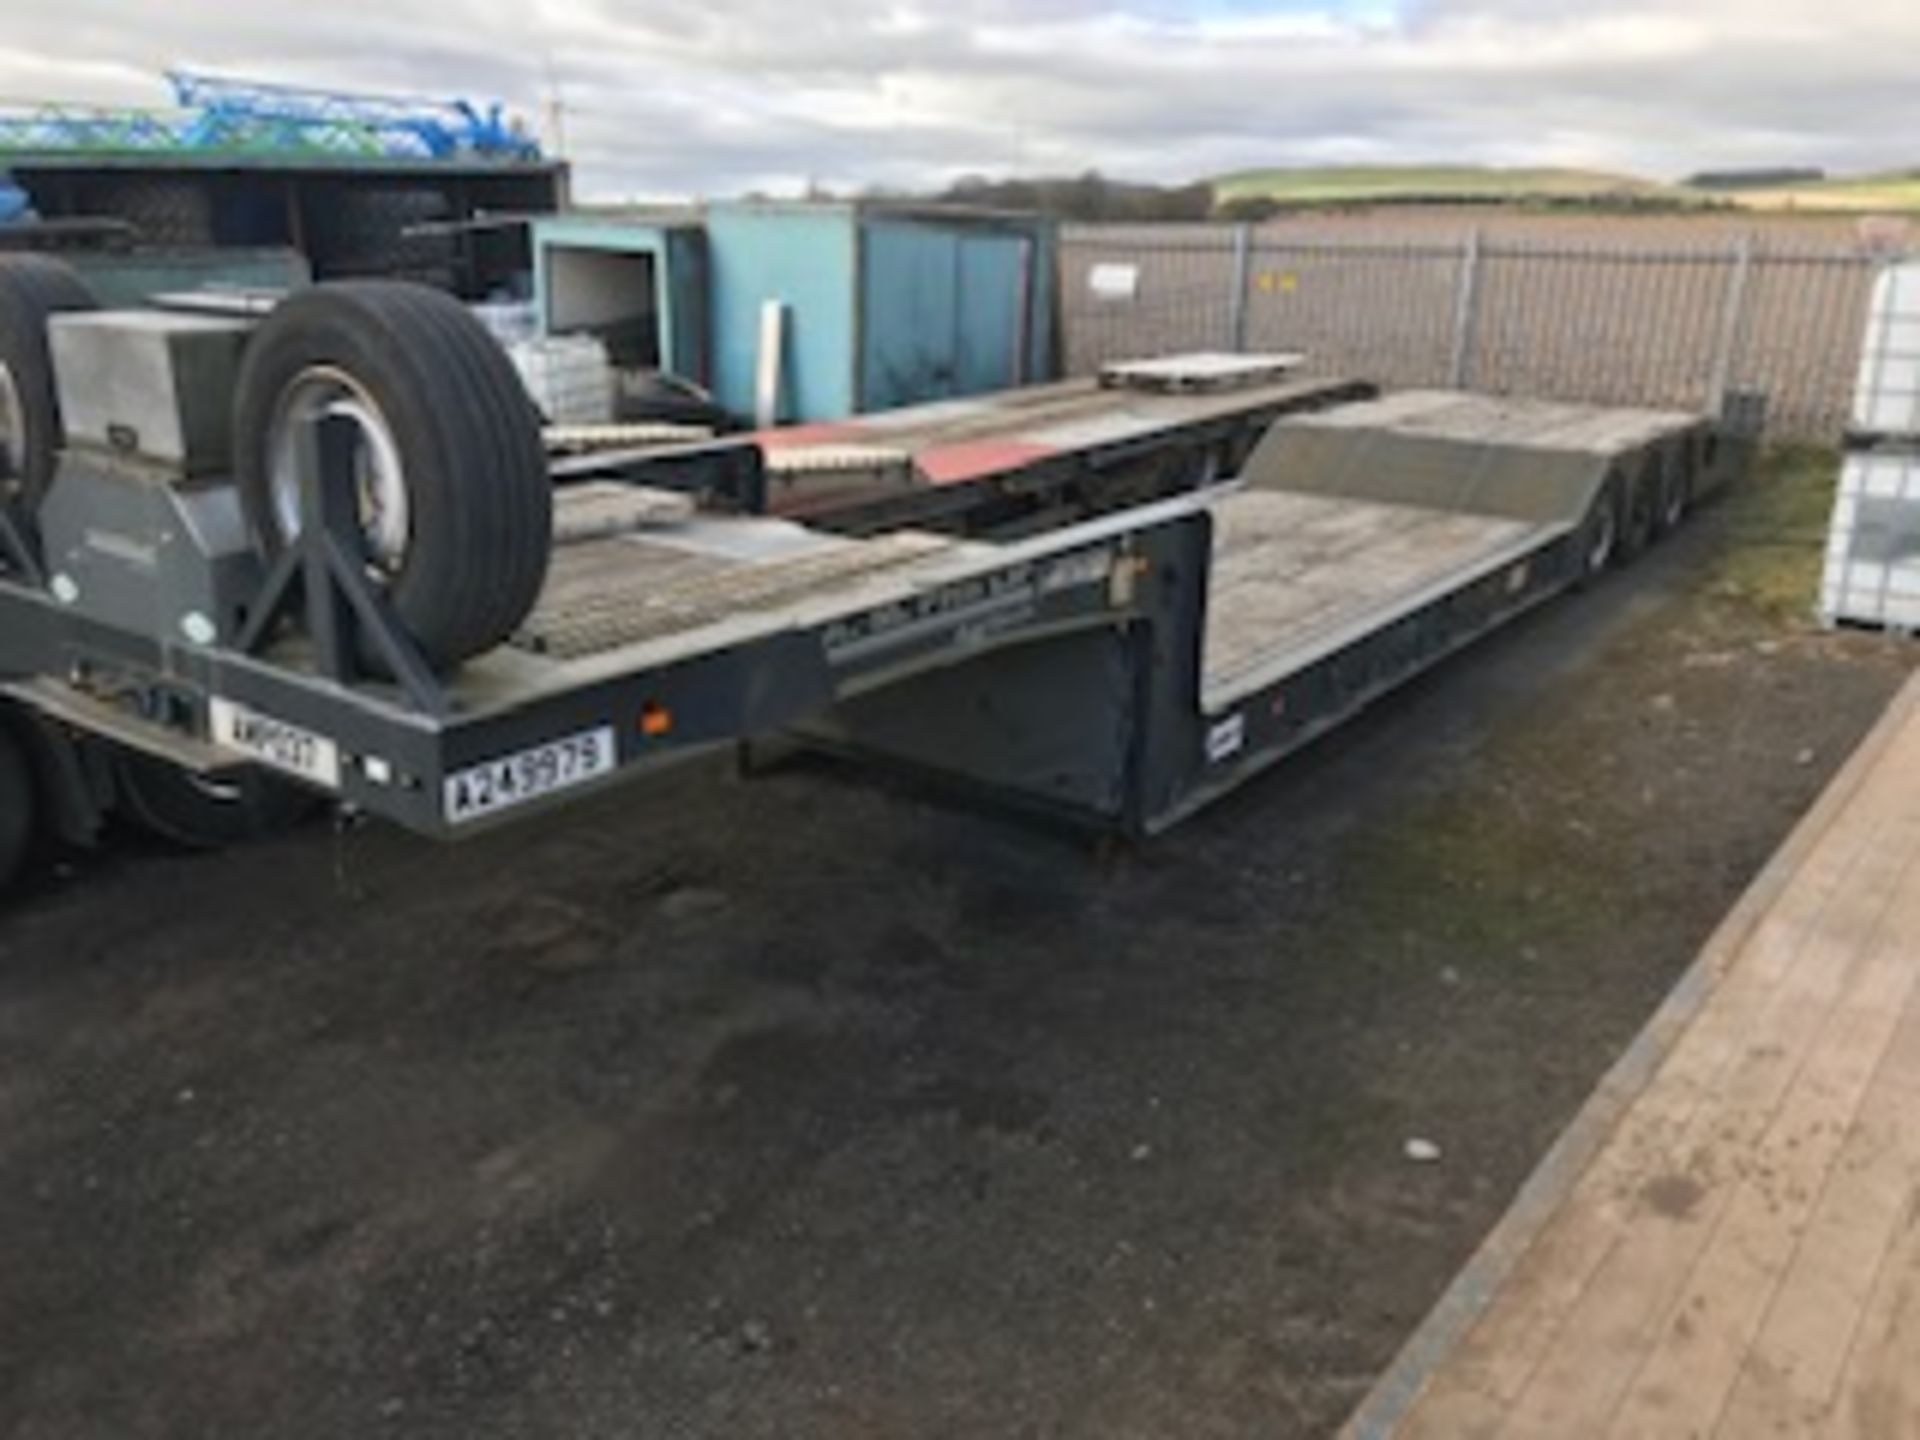 1997 Transporter engineer recovery trailer c/w ramps and electric winch - Image 3 of 11